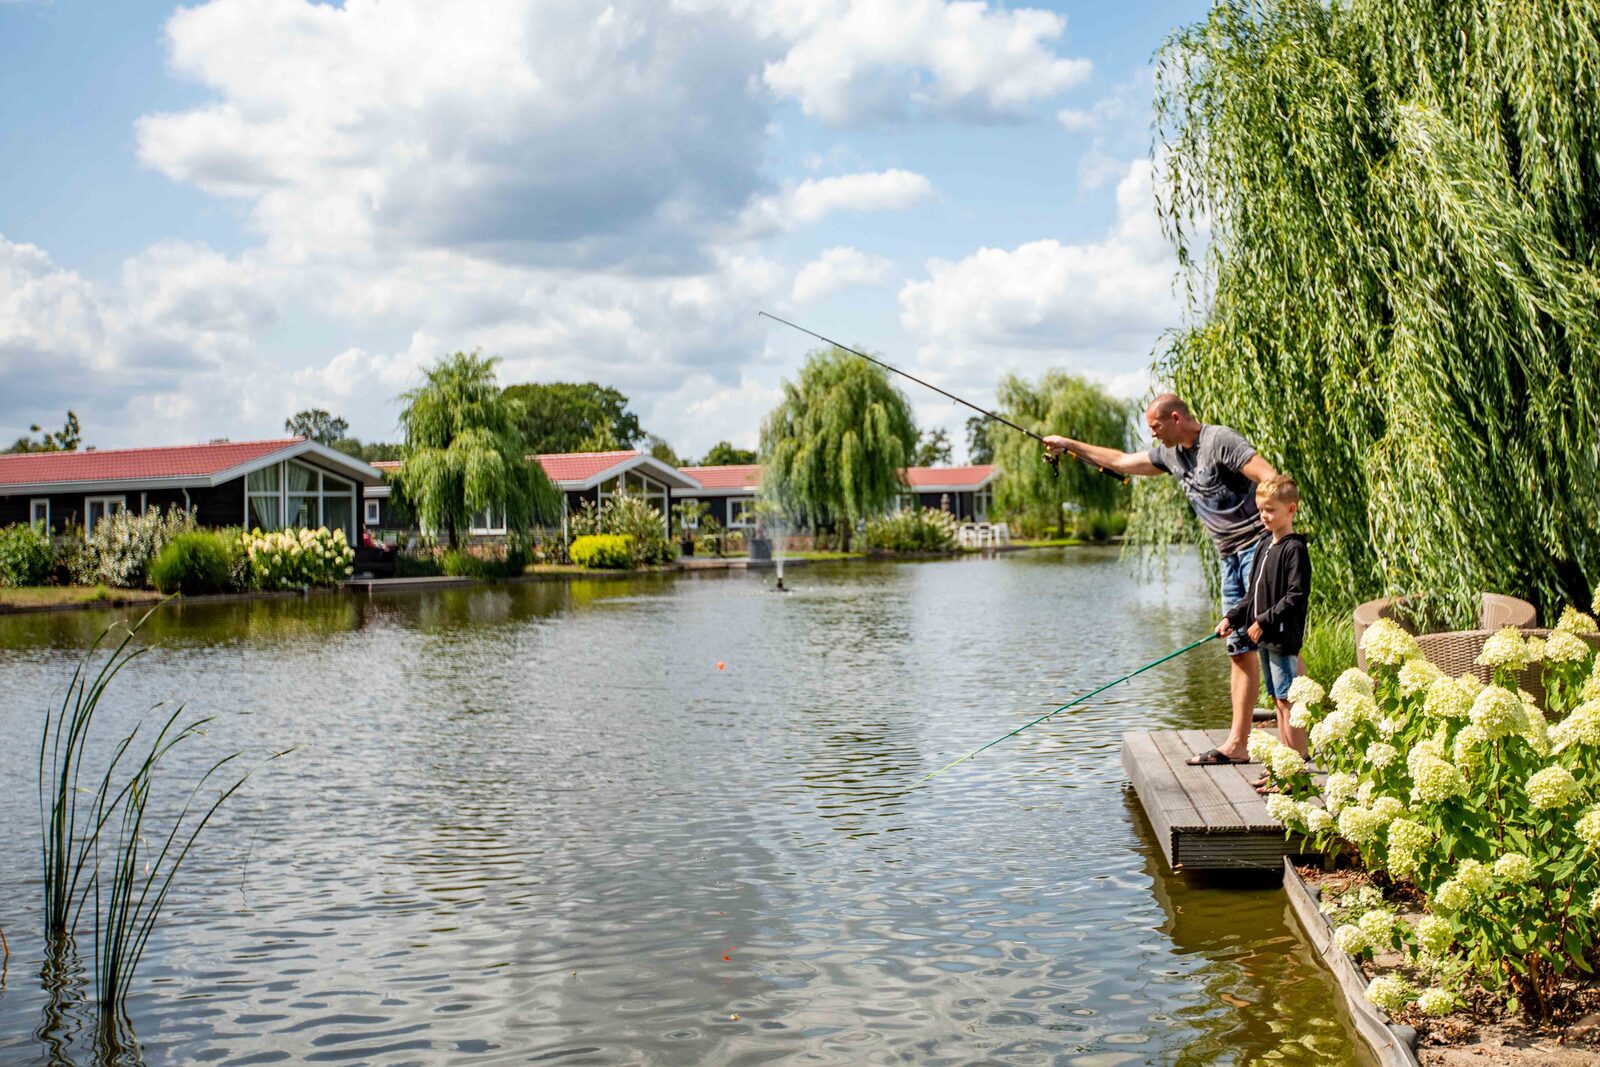 Fishing vacation the Netherlands